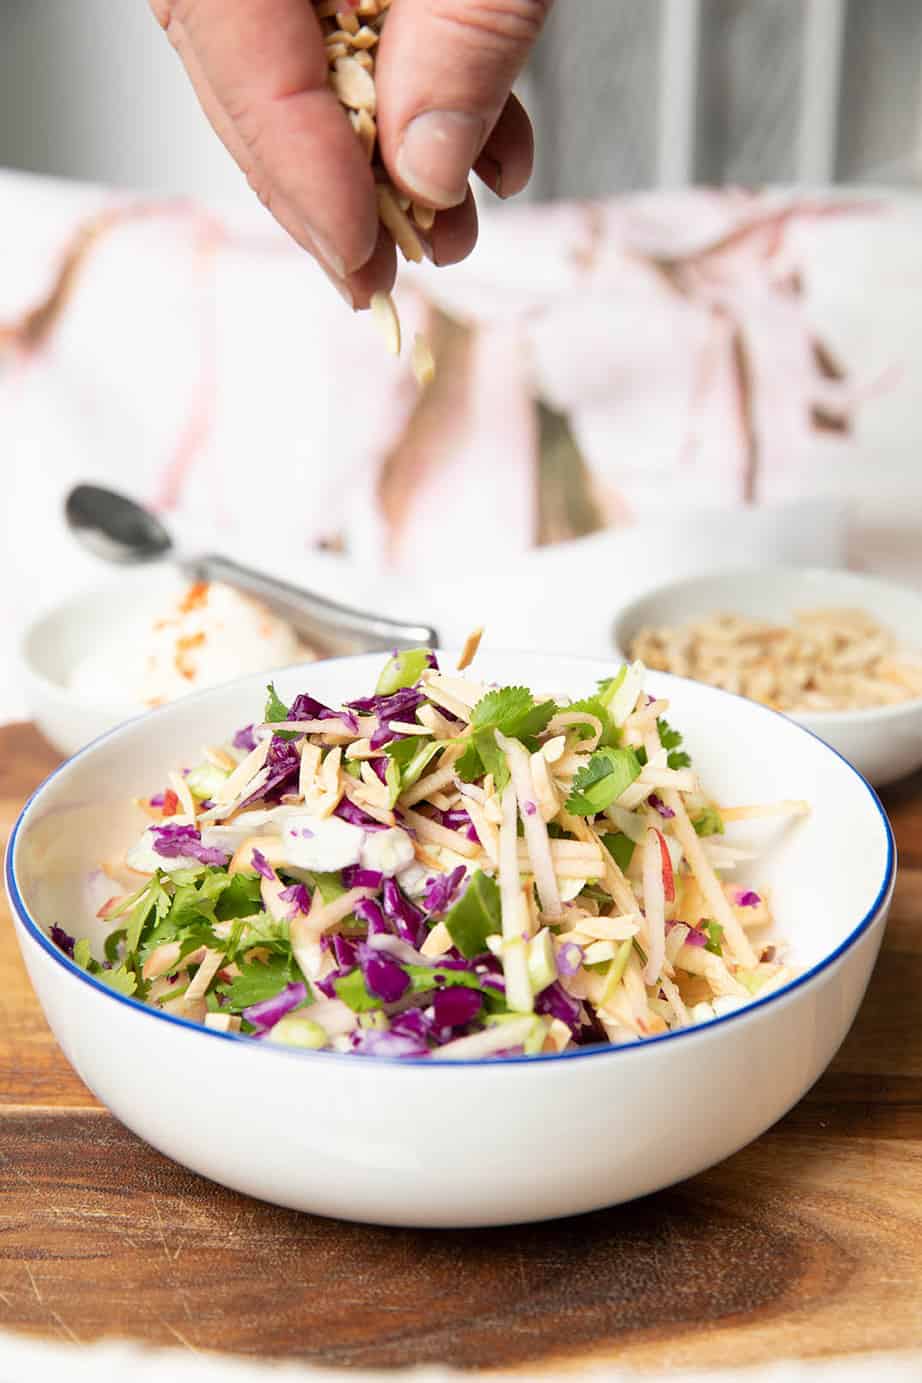 Thermomix coleslaw in a bowl and a hand adding slivered almonds